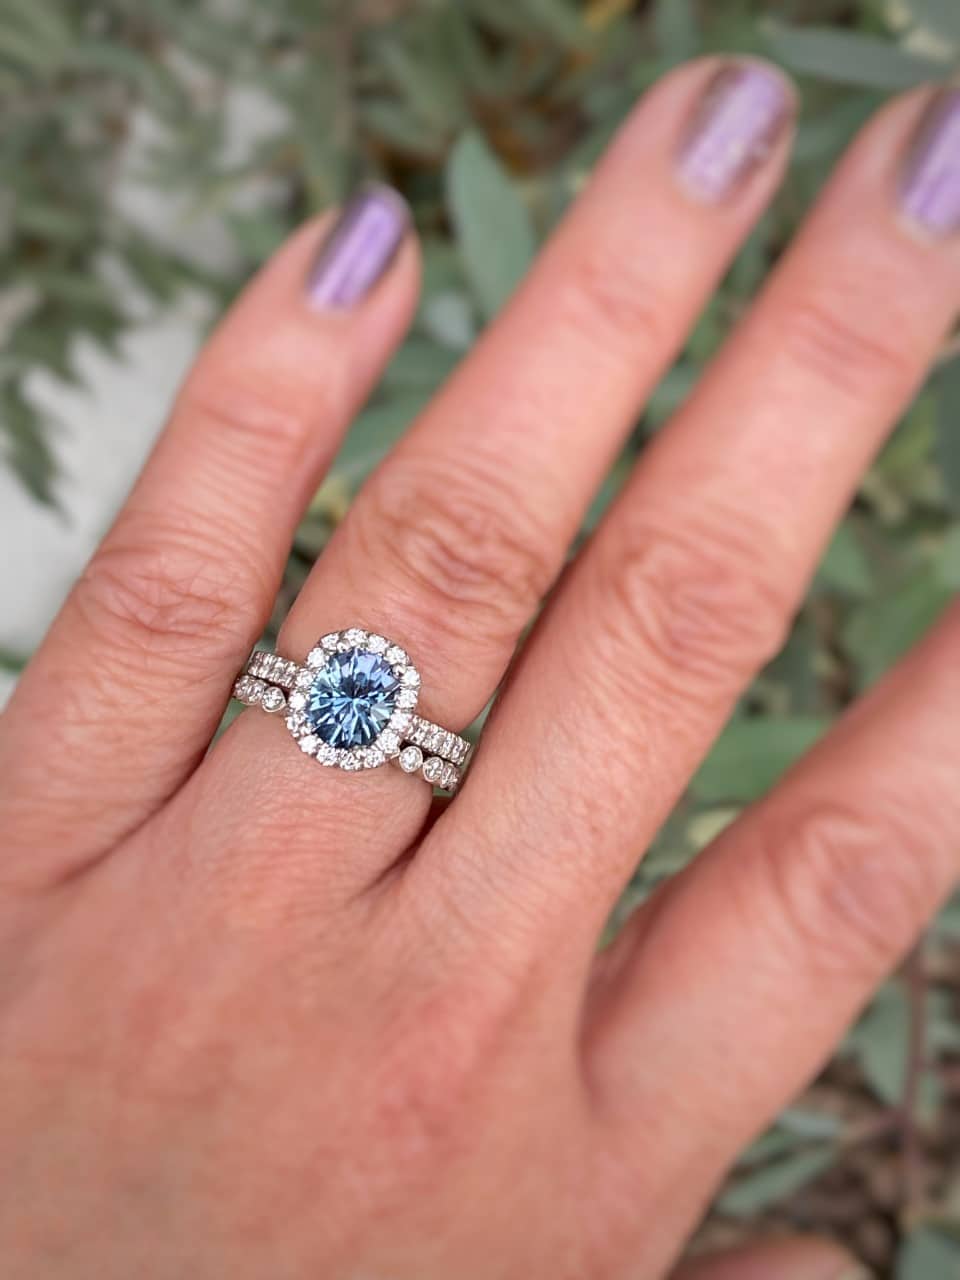 A photo from a customer review featuring a classic pave halo ring in platinum with 2.07-Carat Montana sapphire, alongside the "Loire" band in platinum